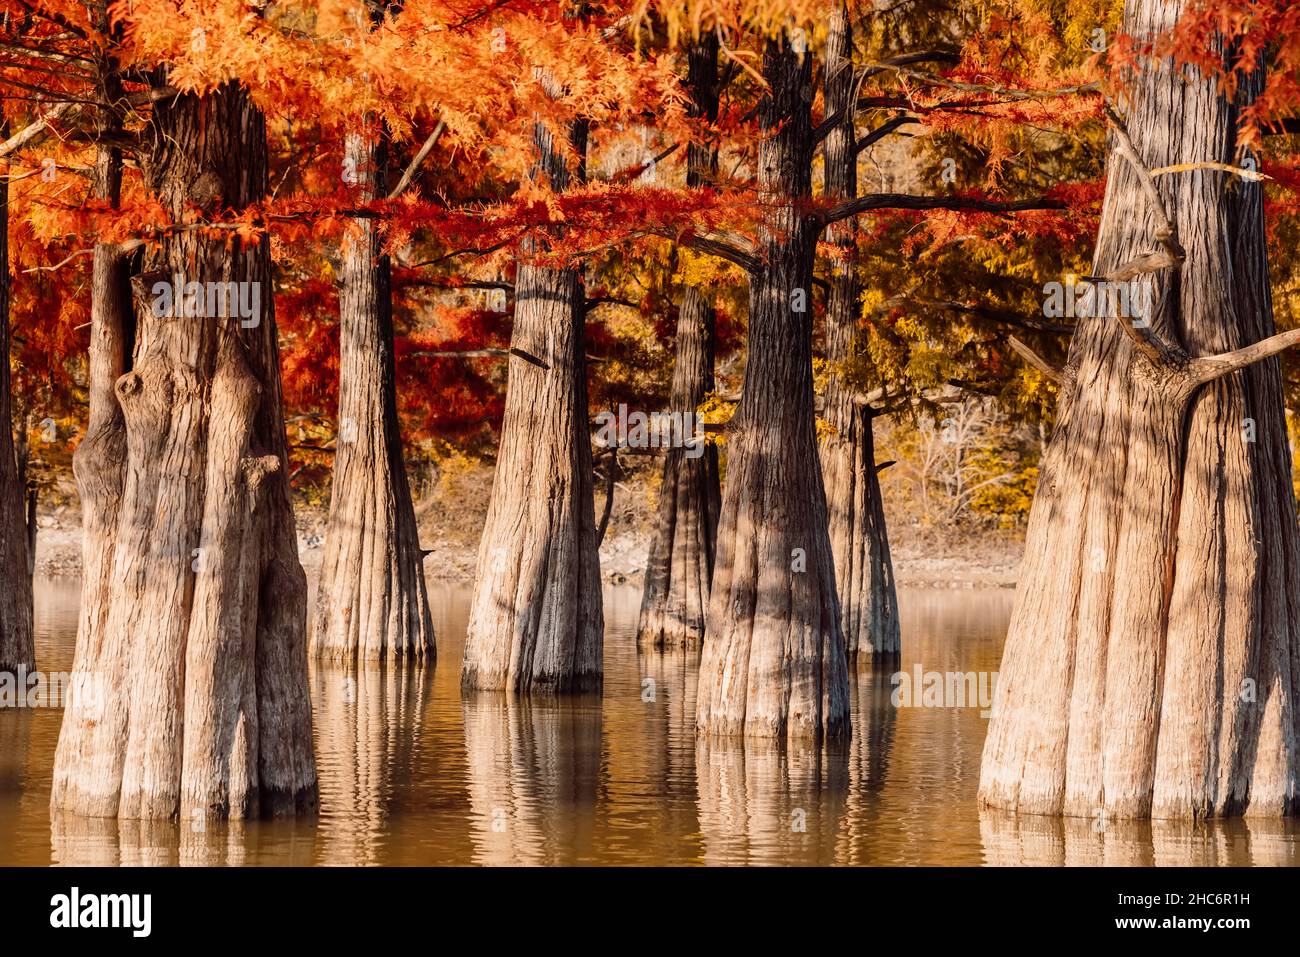 Swamp cypresses and lake with reflection. Taxodium distichum with red needles. Stock Photo